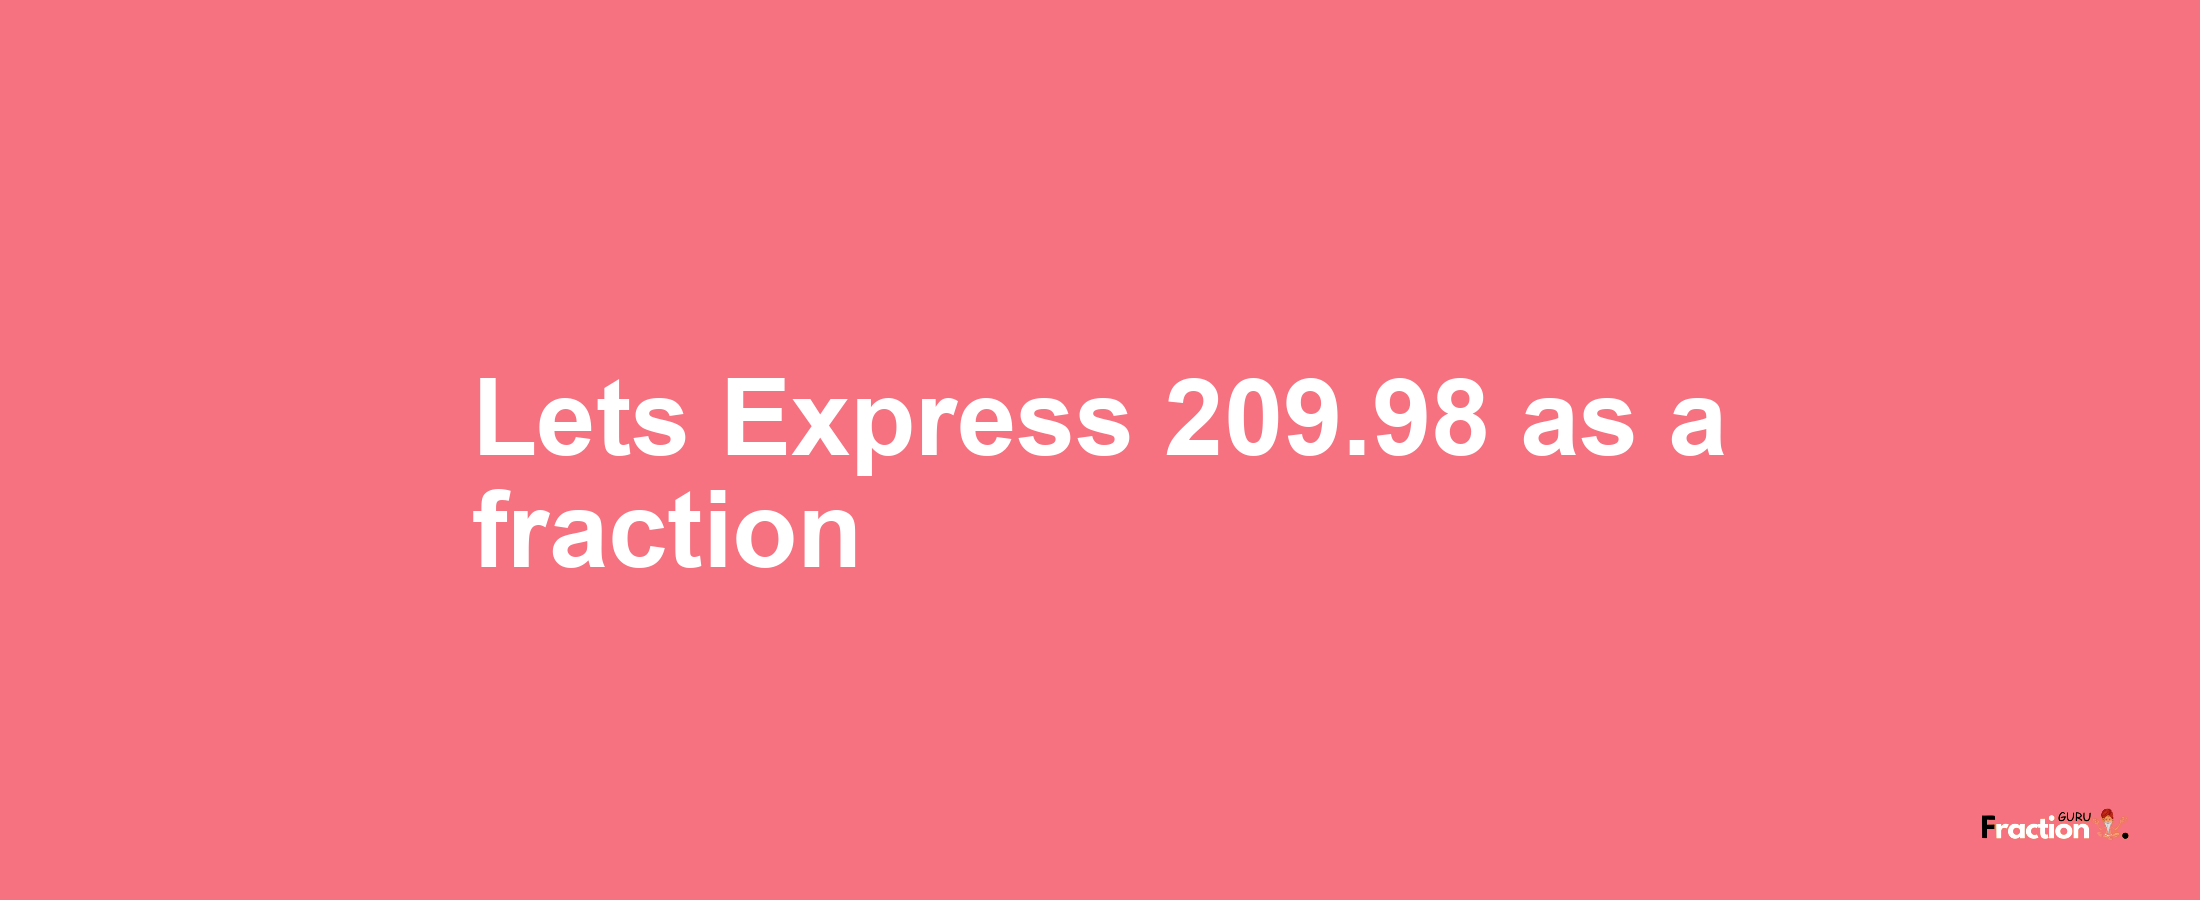 Lets Express 209.98 as afraction